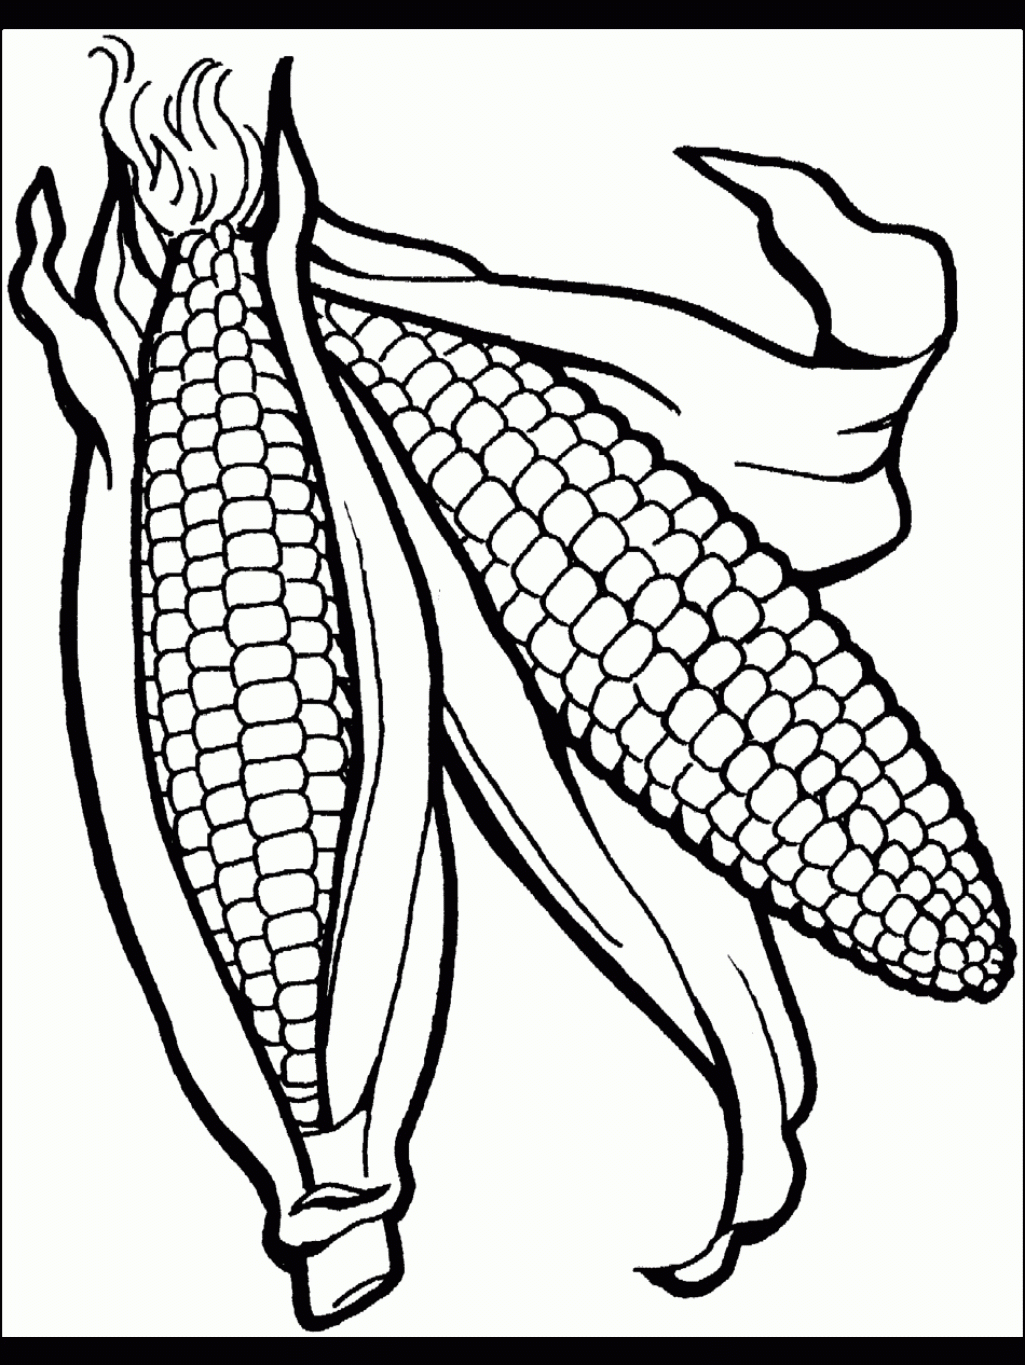 vegetables-and-fruits-coloring-pages-coloring-pages-to-download-and-print